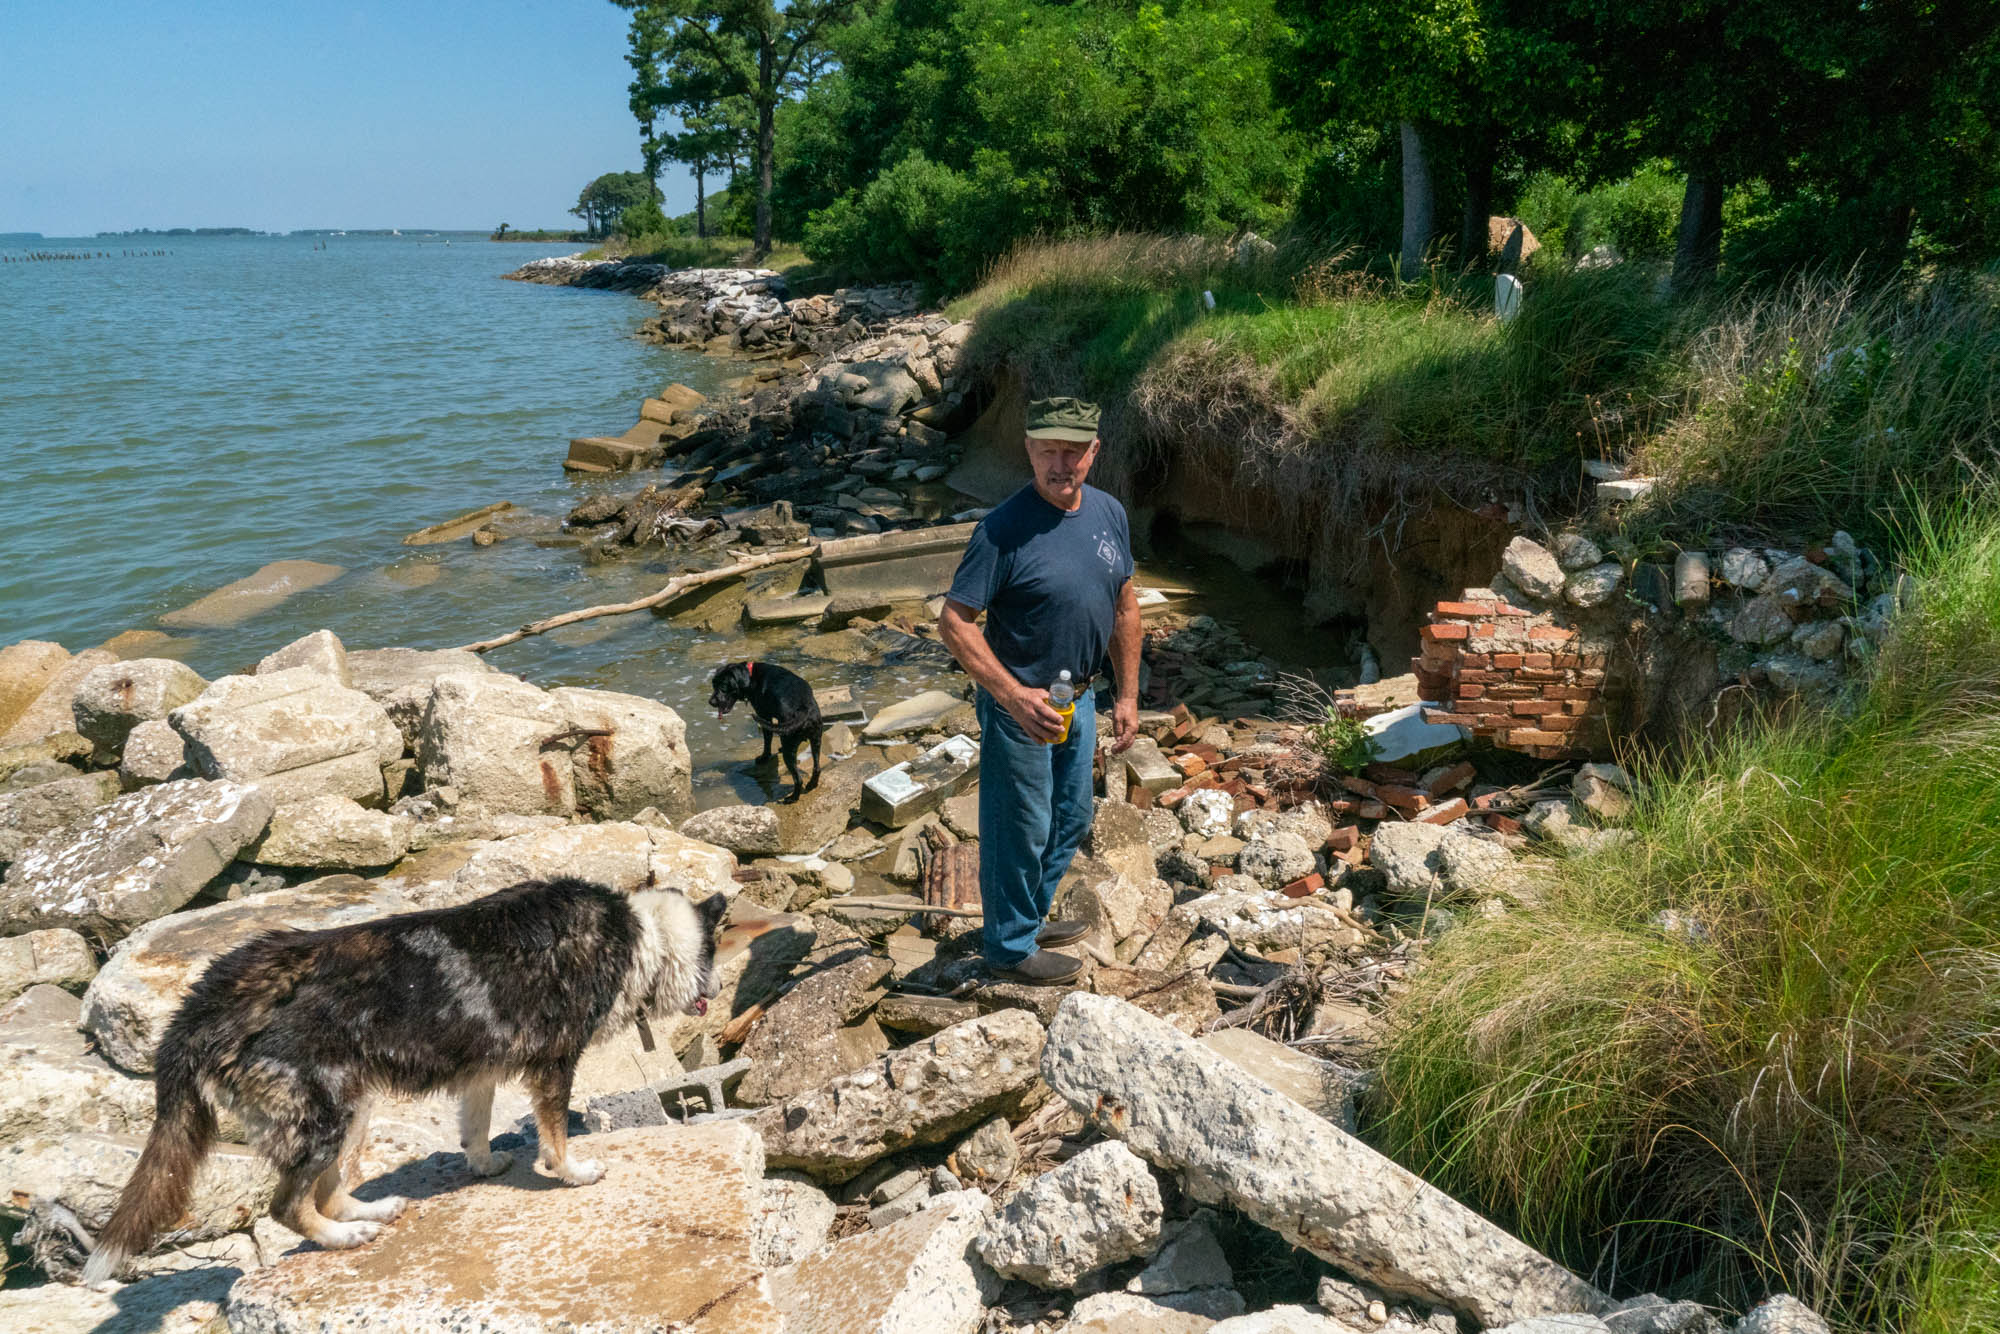 Donald Willey of Hoopers Island, Maryland, has spent 17 years trying to save the tombs and headstones of his island’s ancestors from falling into the Chesapeake Bay. He has placed rocks on the shoreline to keep the water back, but it continues to seep through the barriers. (Jordan Laird/News21)